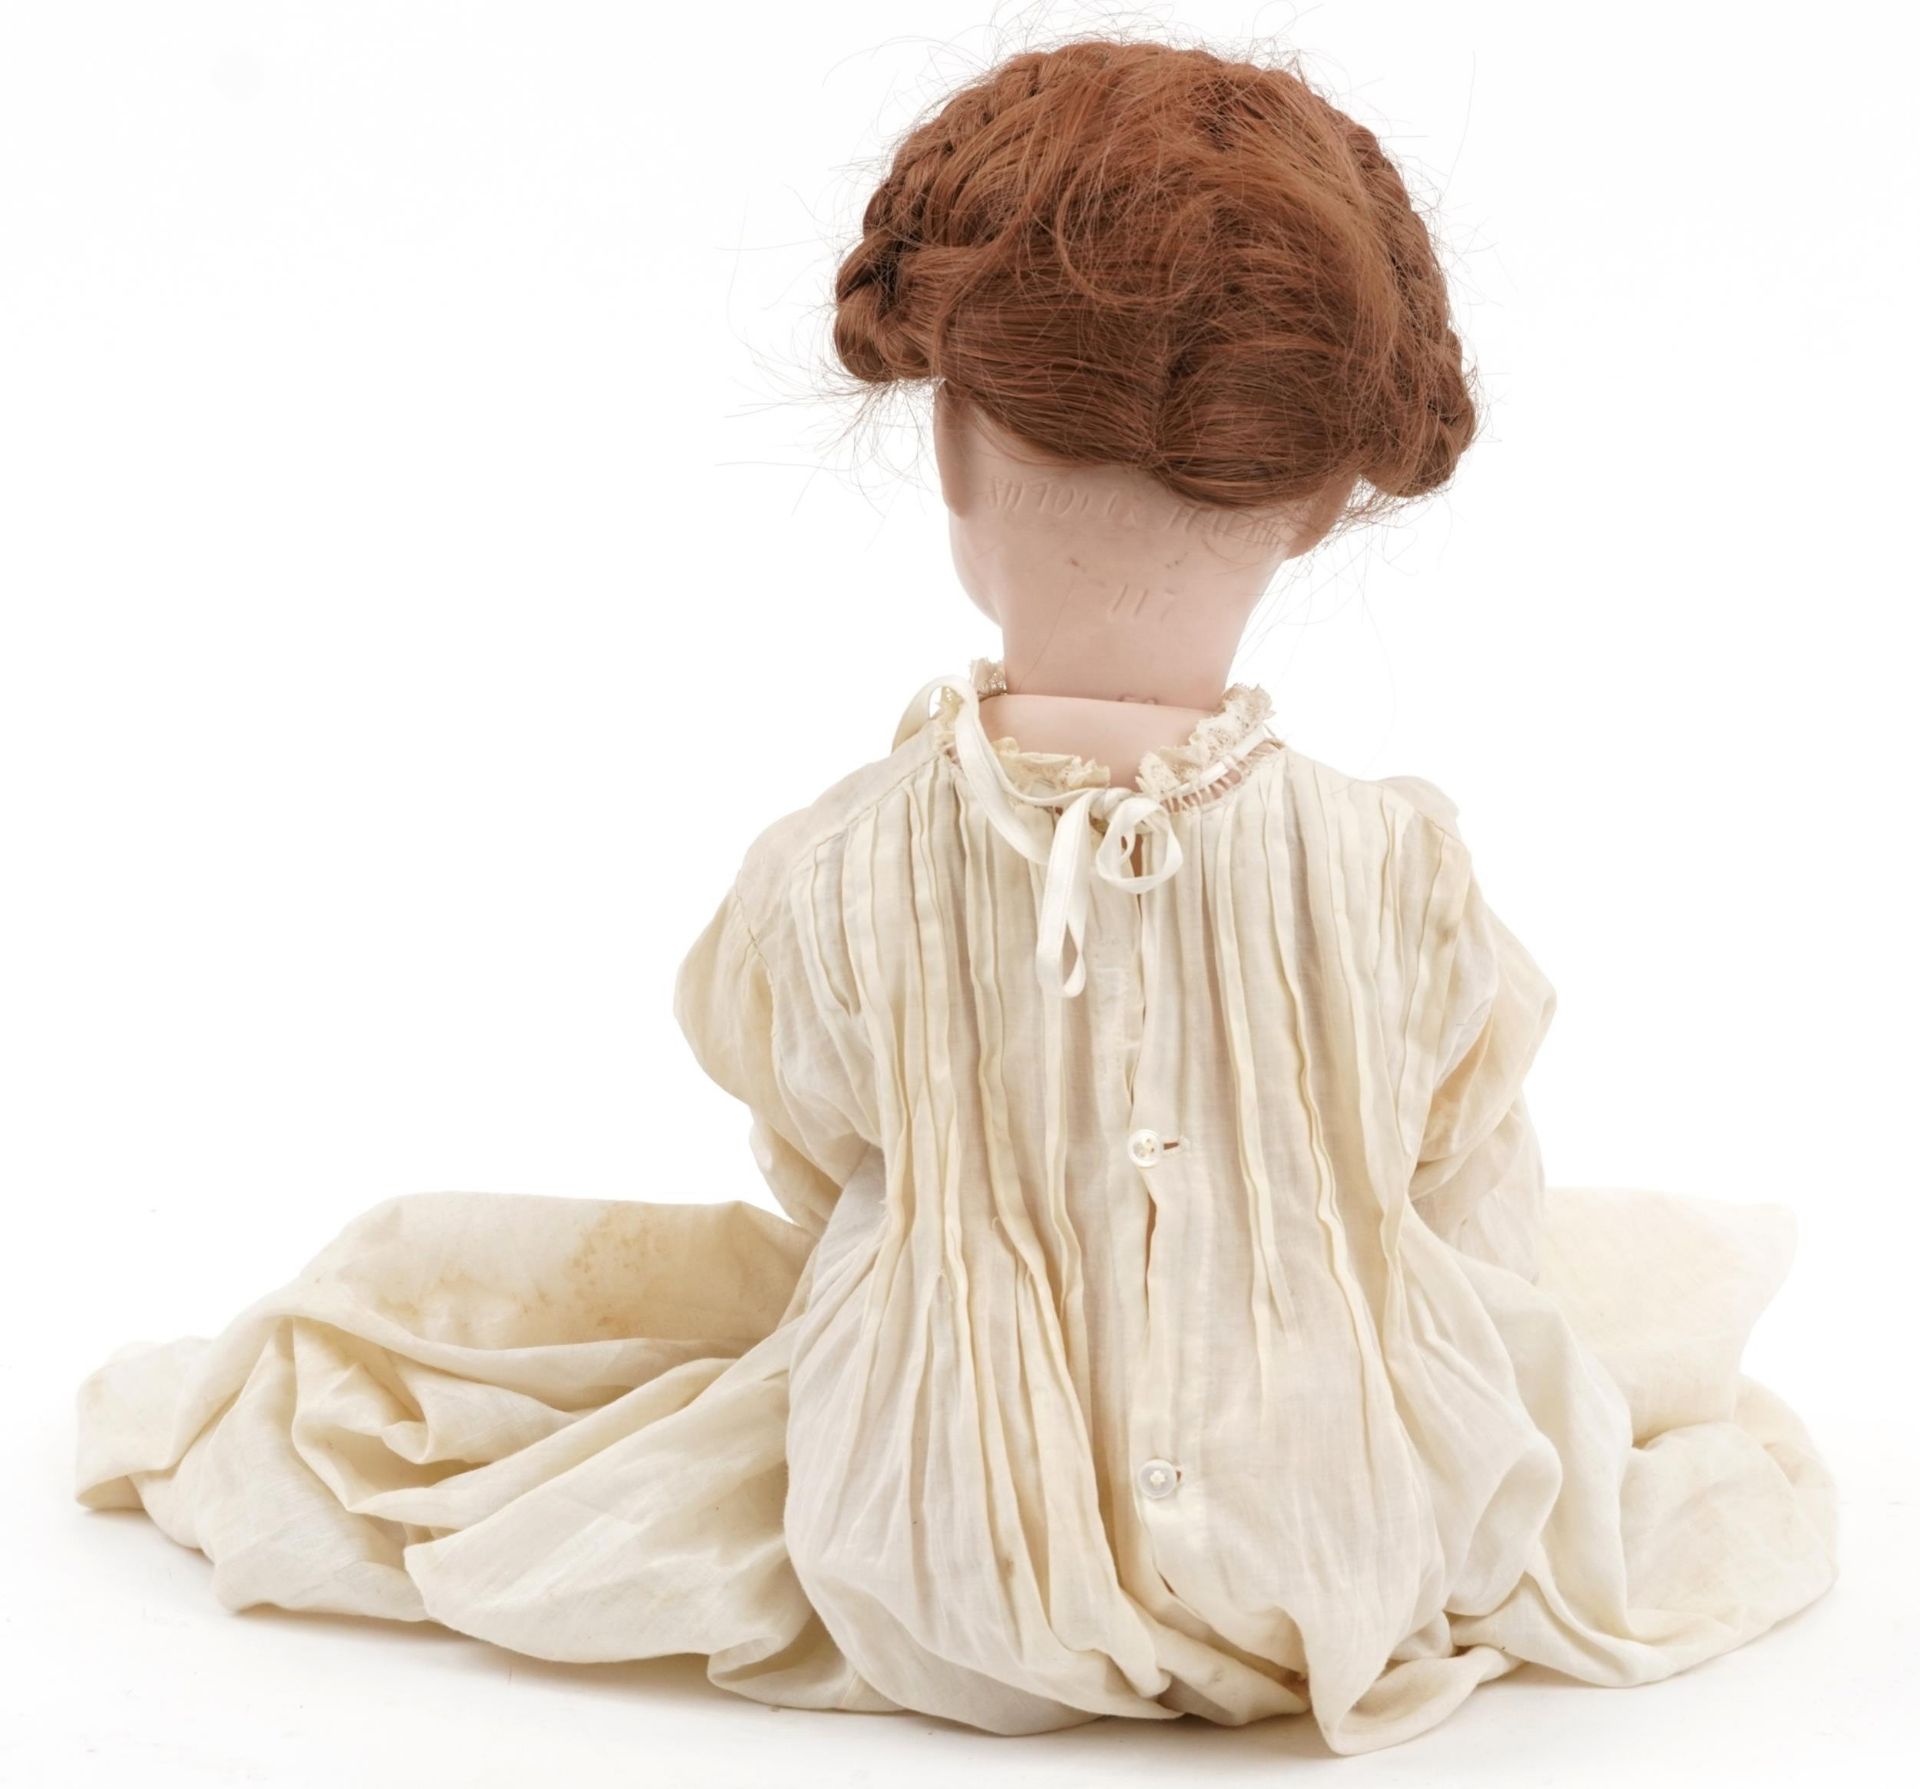 Simon & Halbig bisque headed doll with Ron Moles articulated body, 47cm in length : For further - Image 2 of 4